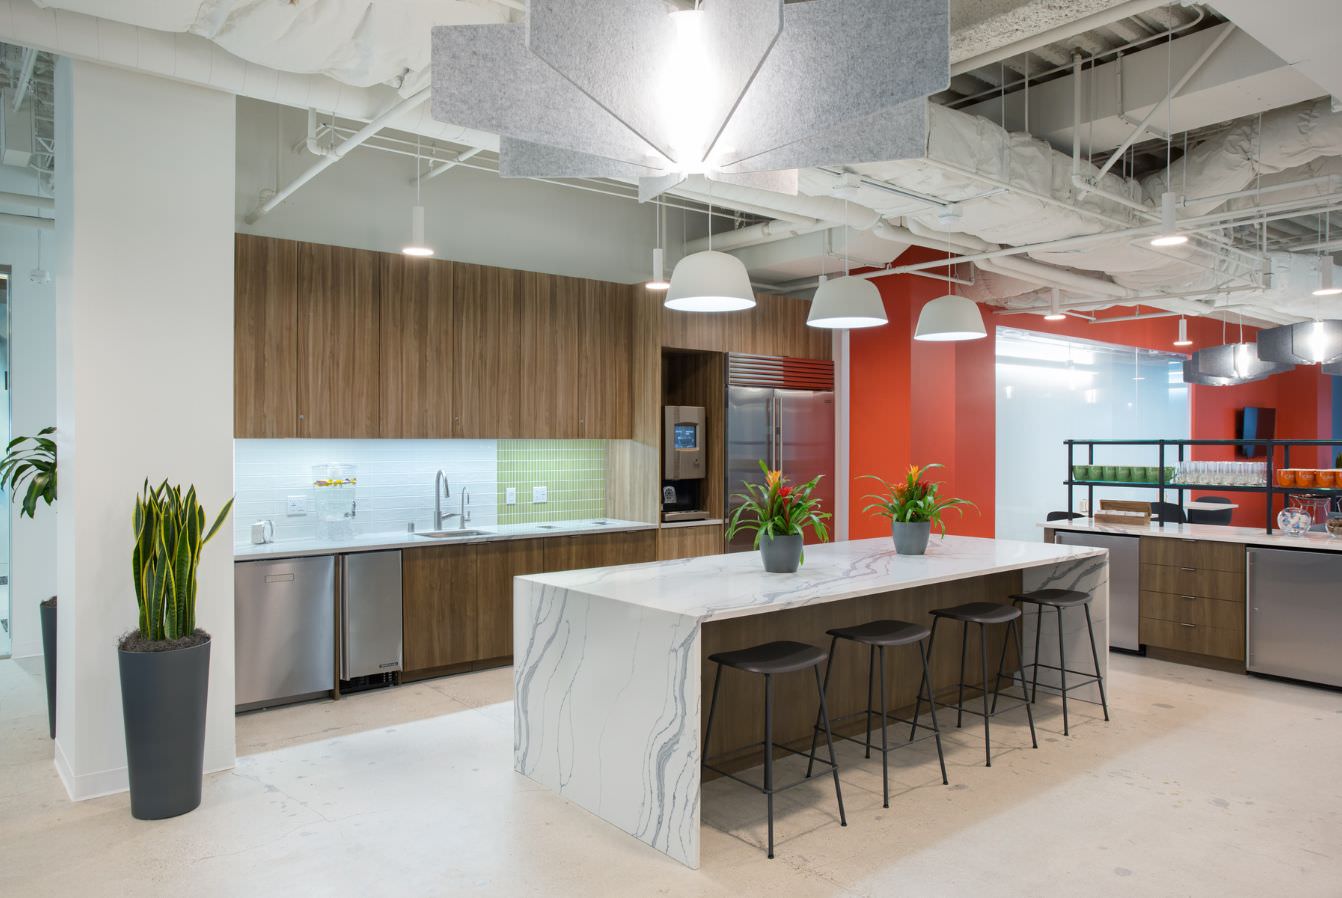 Top amenities, including our coworking cafe in DTLA.